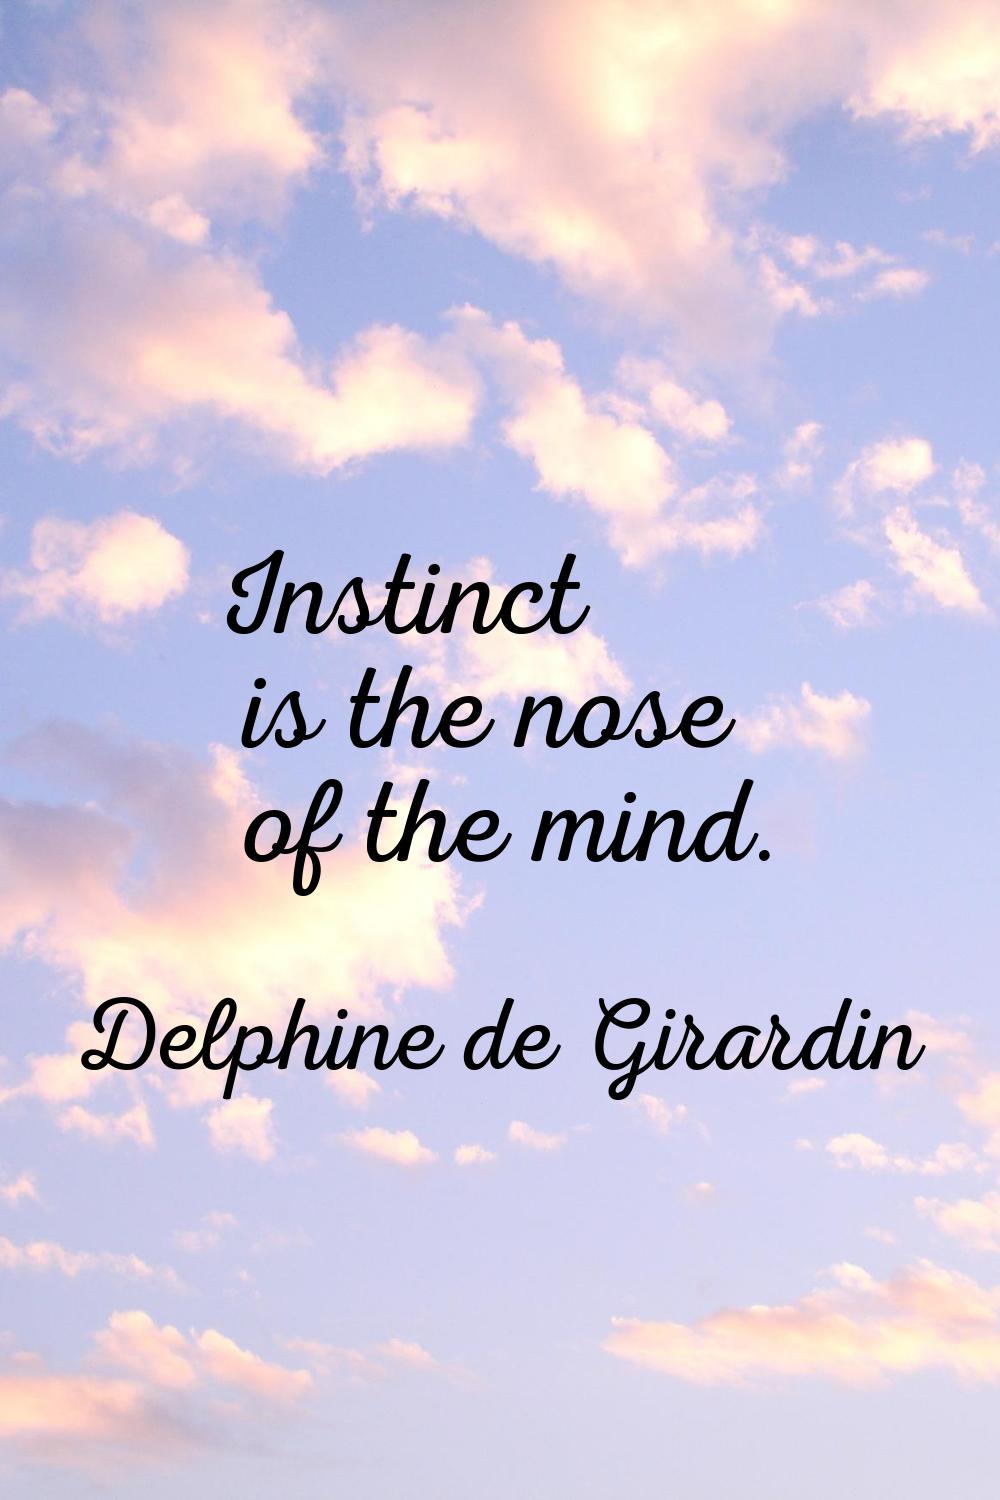 Instinct is the nose of the mind.